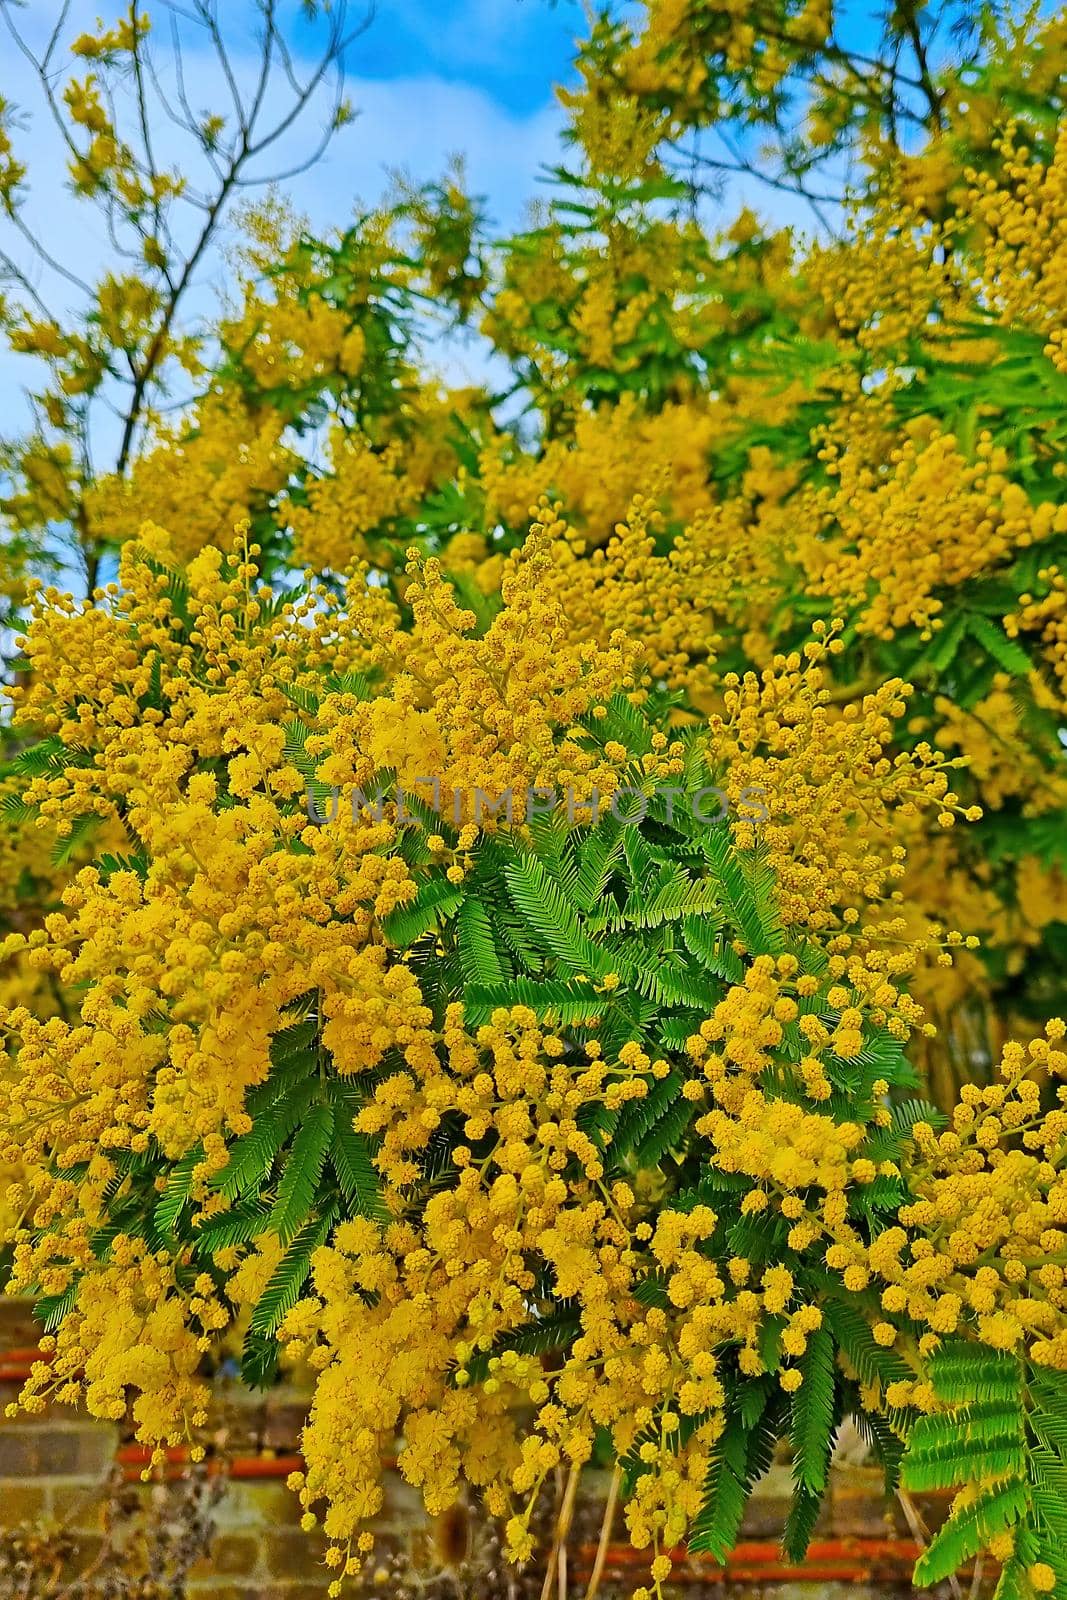 Flowering yellow tansy bushes in the park in the spring. by kip02kas